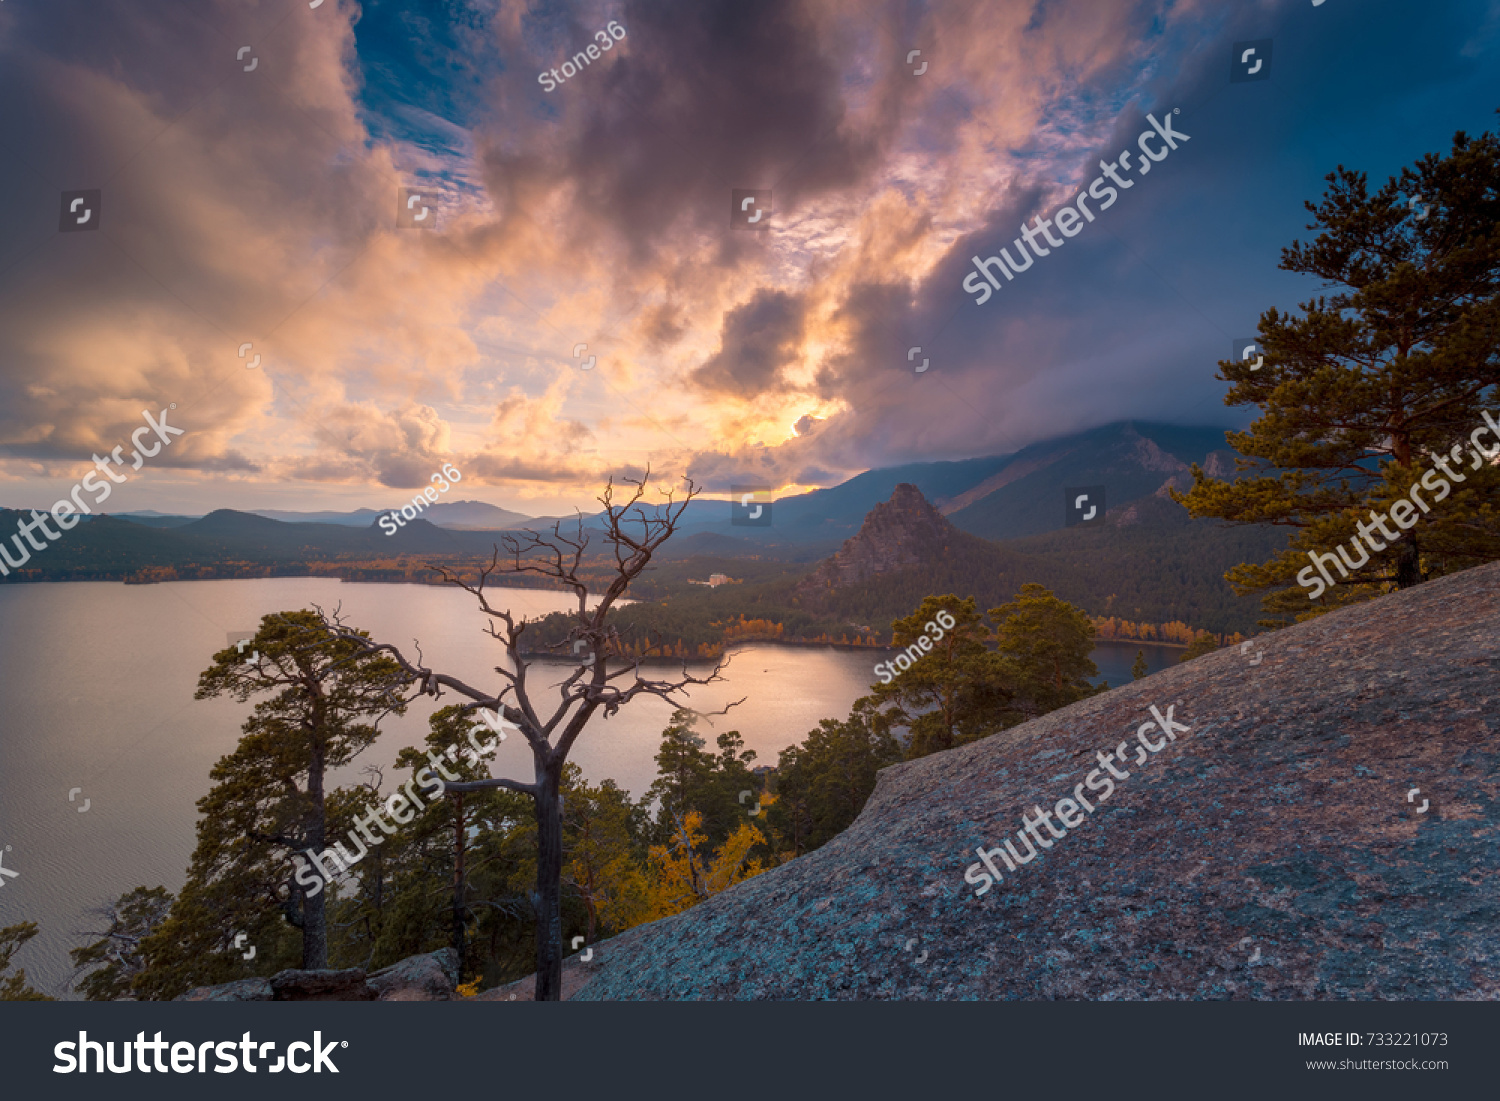 Beautiful sunset. Pine trees at sunset on a rocky mountains hill against dramatic clouds. Mountain lake on background. #733221073